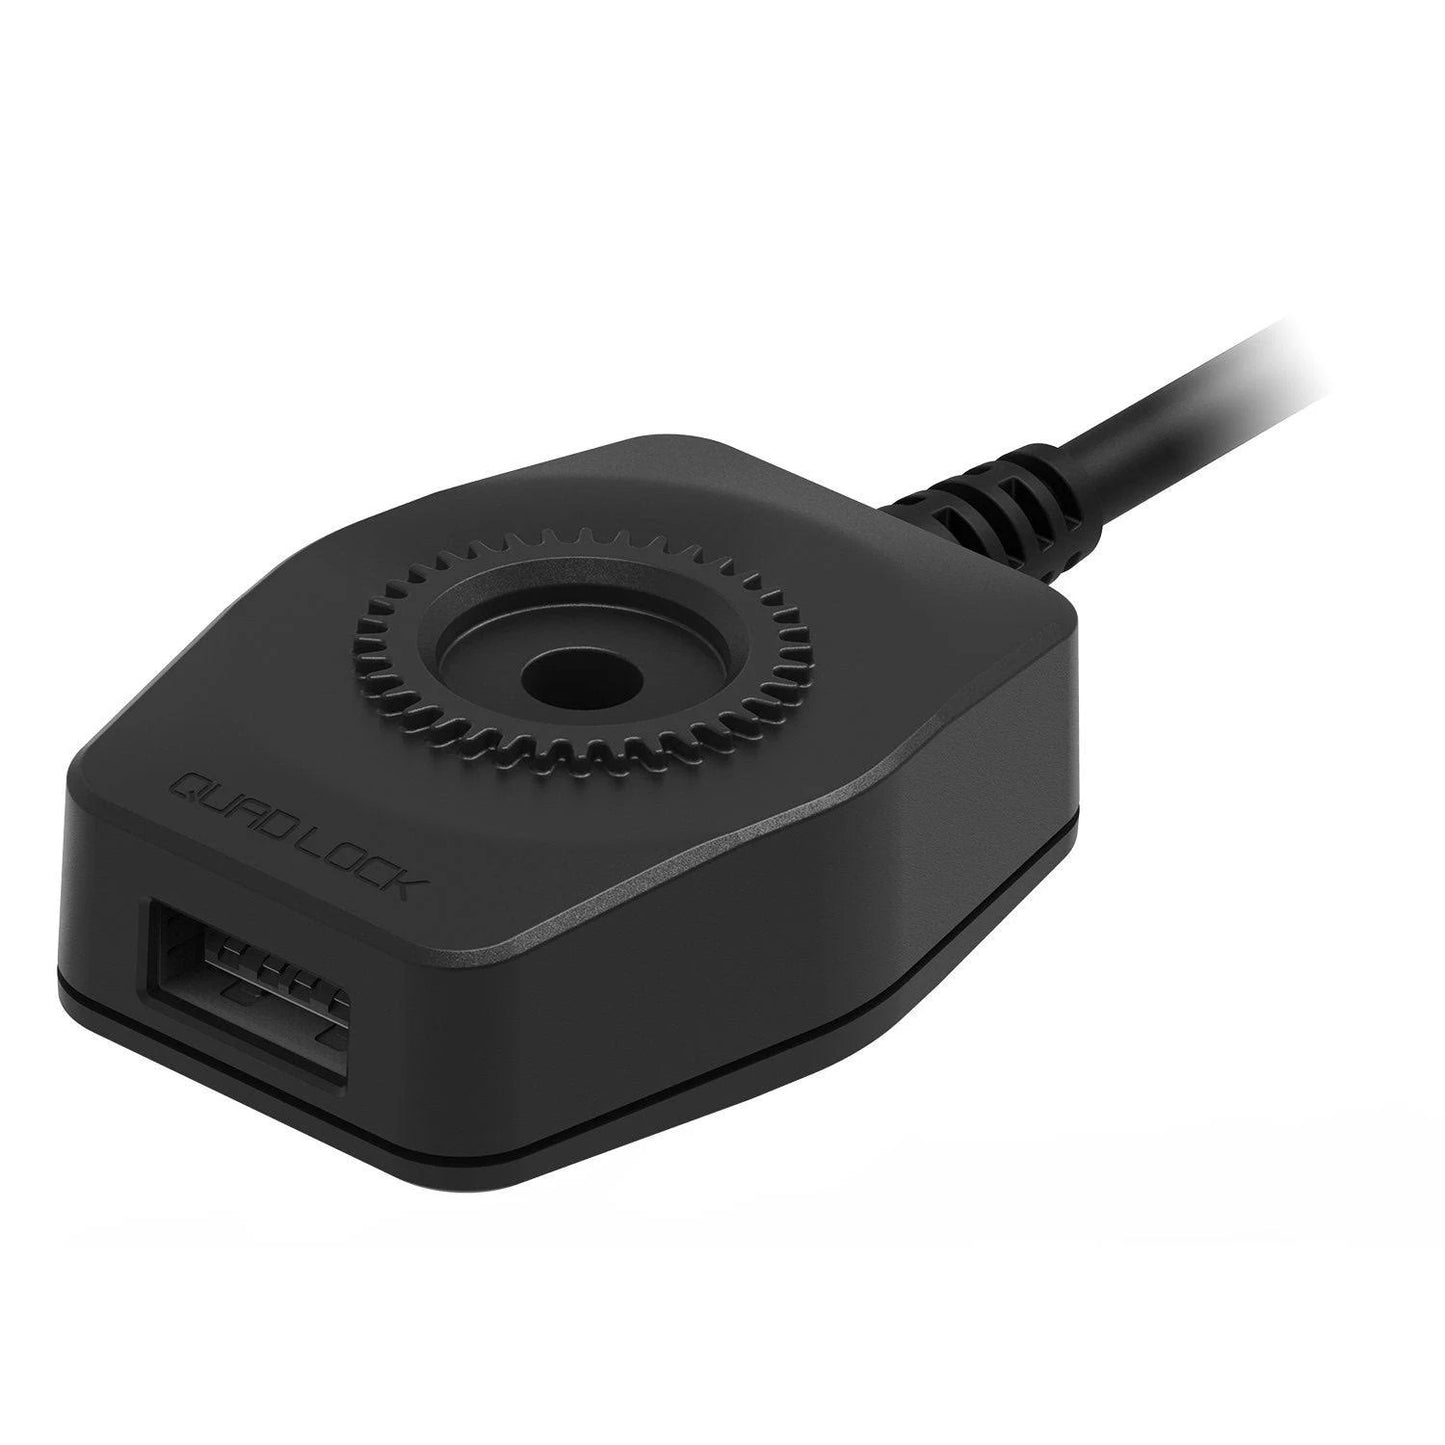 Quad Lock Usb Charger Motorcycle